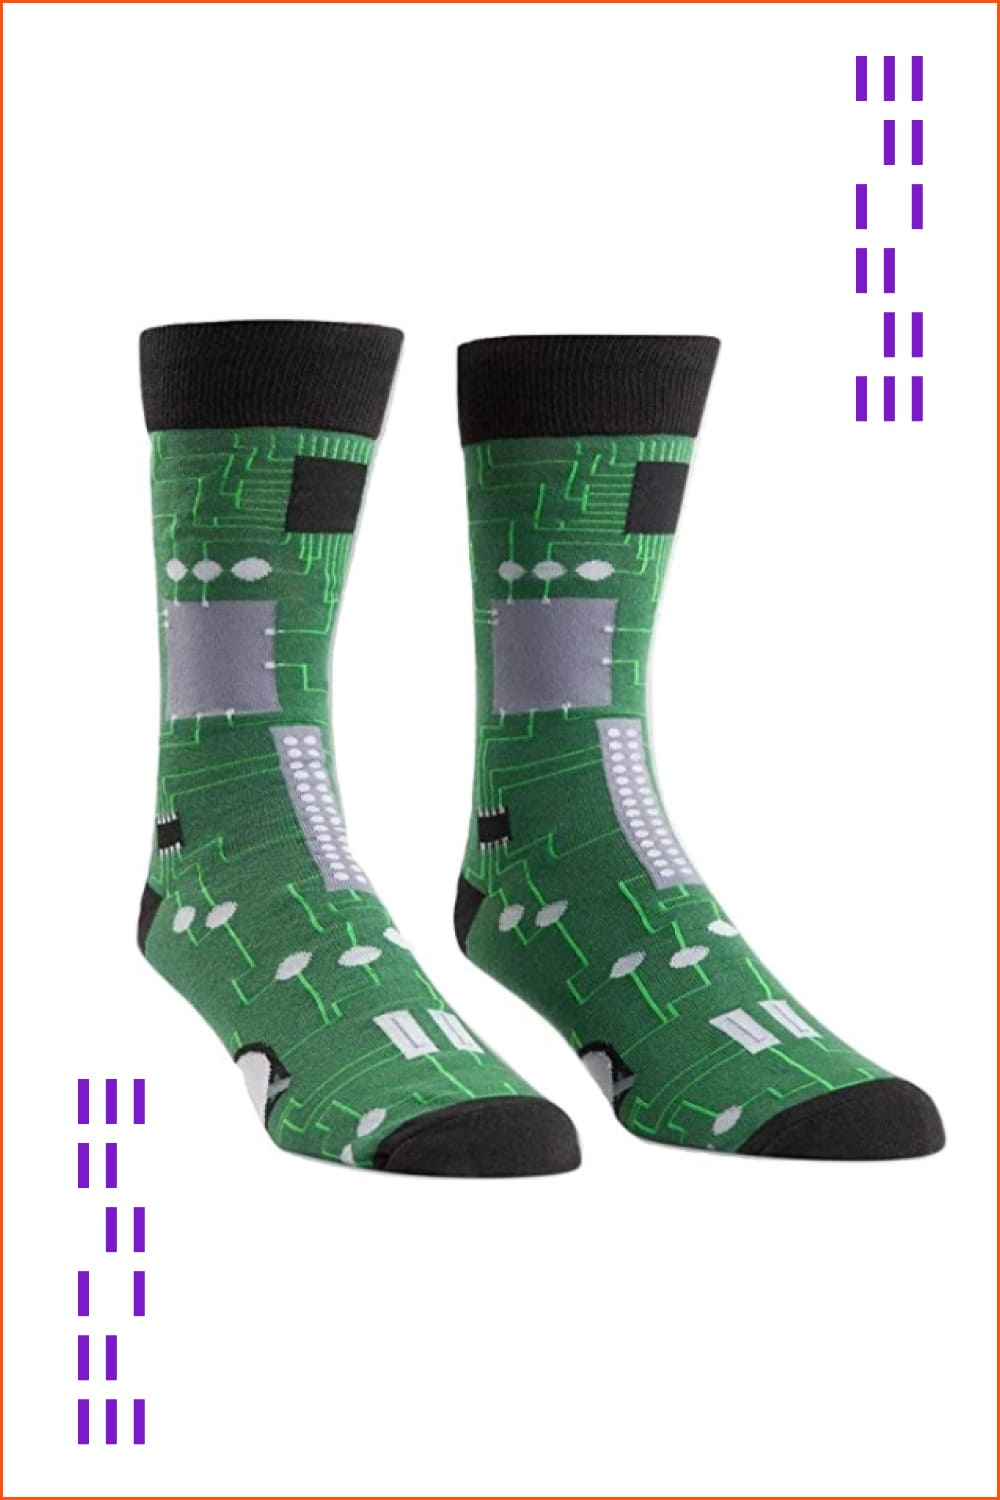 Green socks with electrical plate pattern.